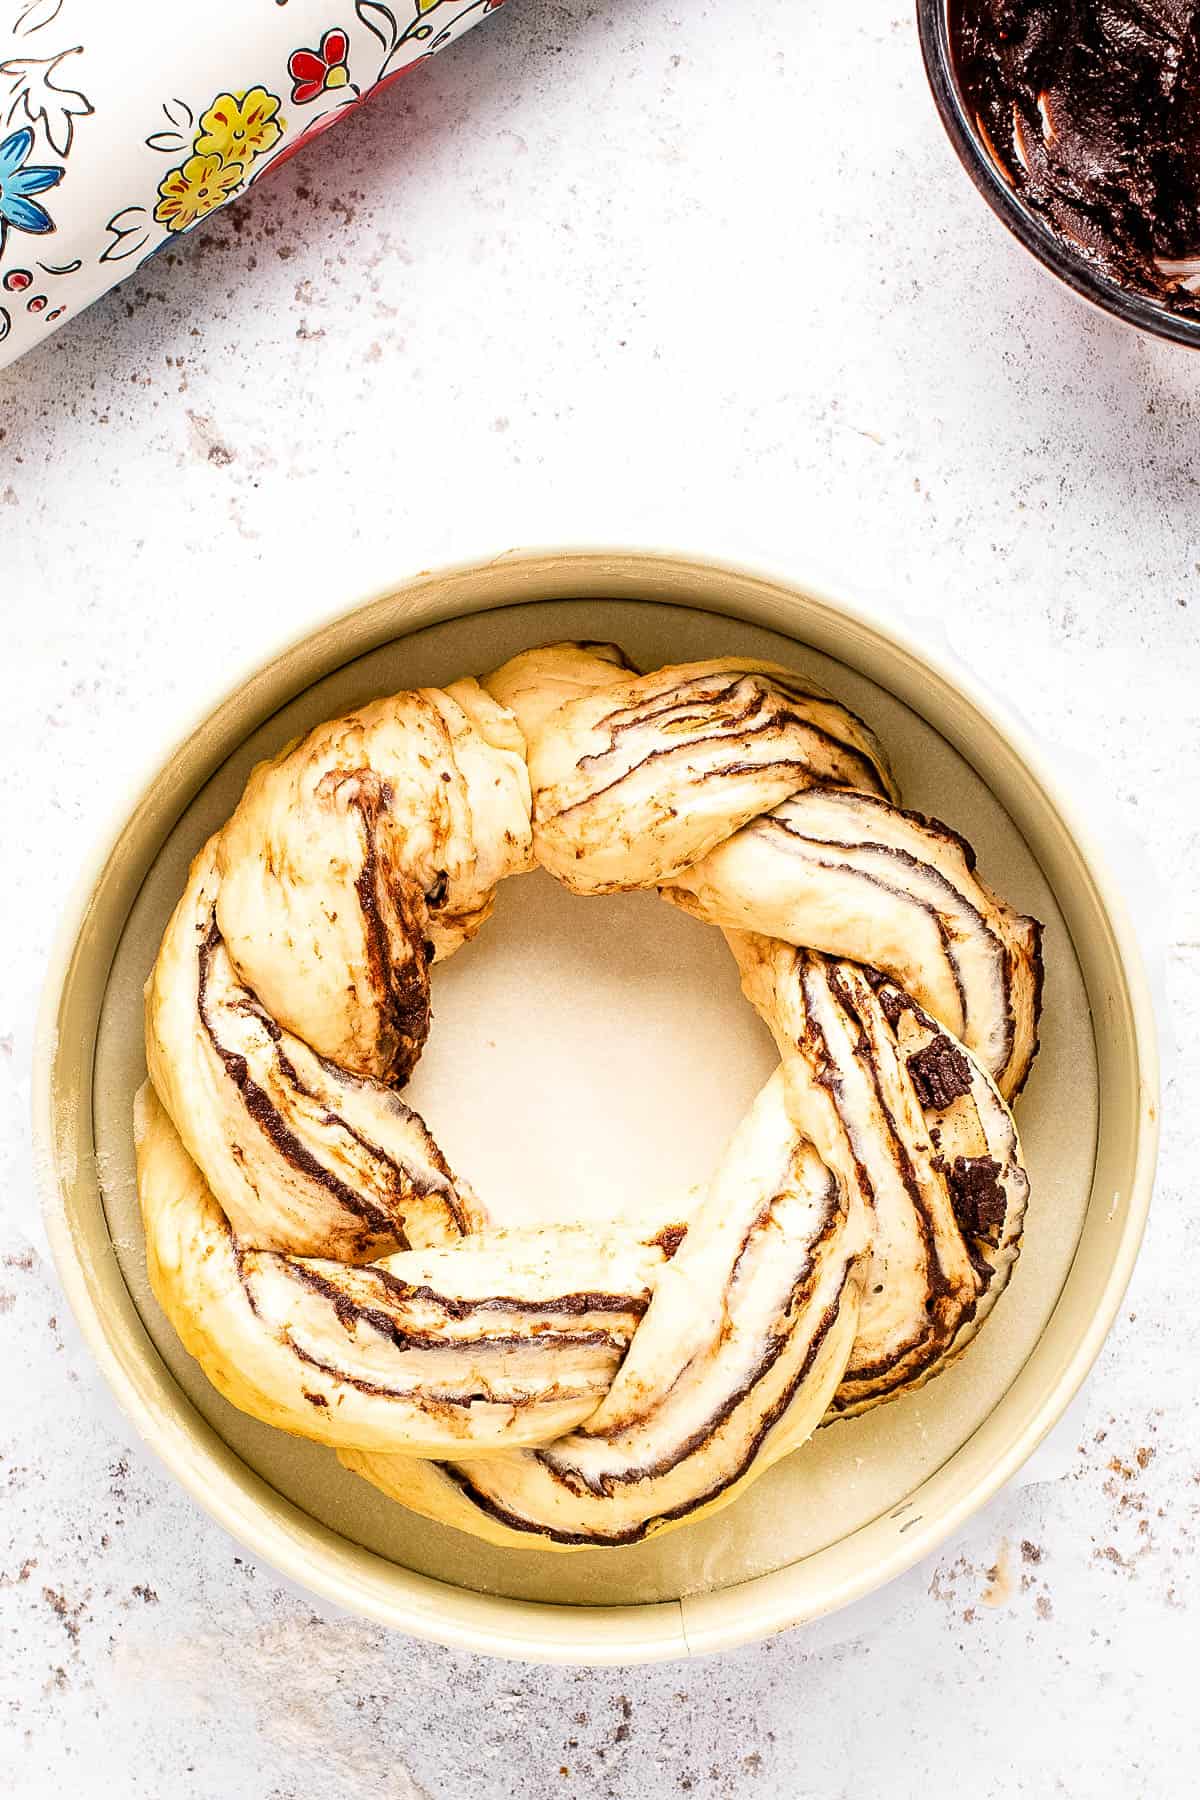 A braided chocolate babka in a white bowl next to a roll of wrapping paper.